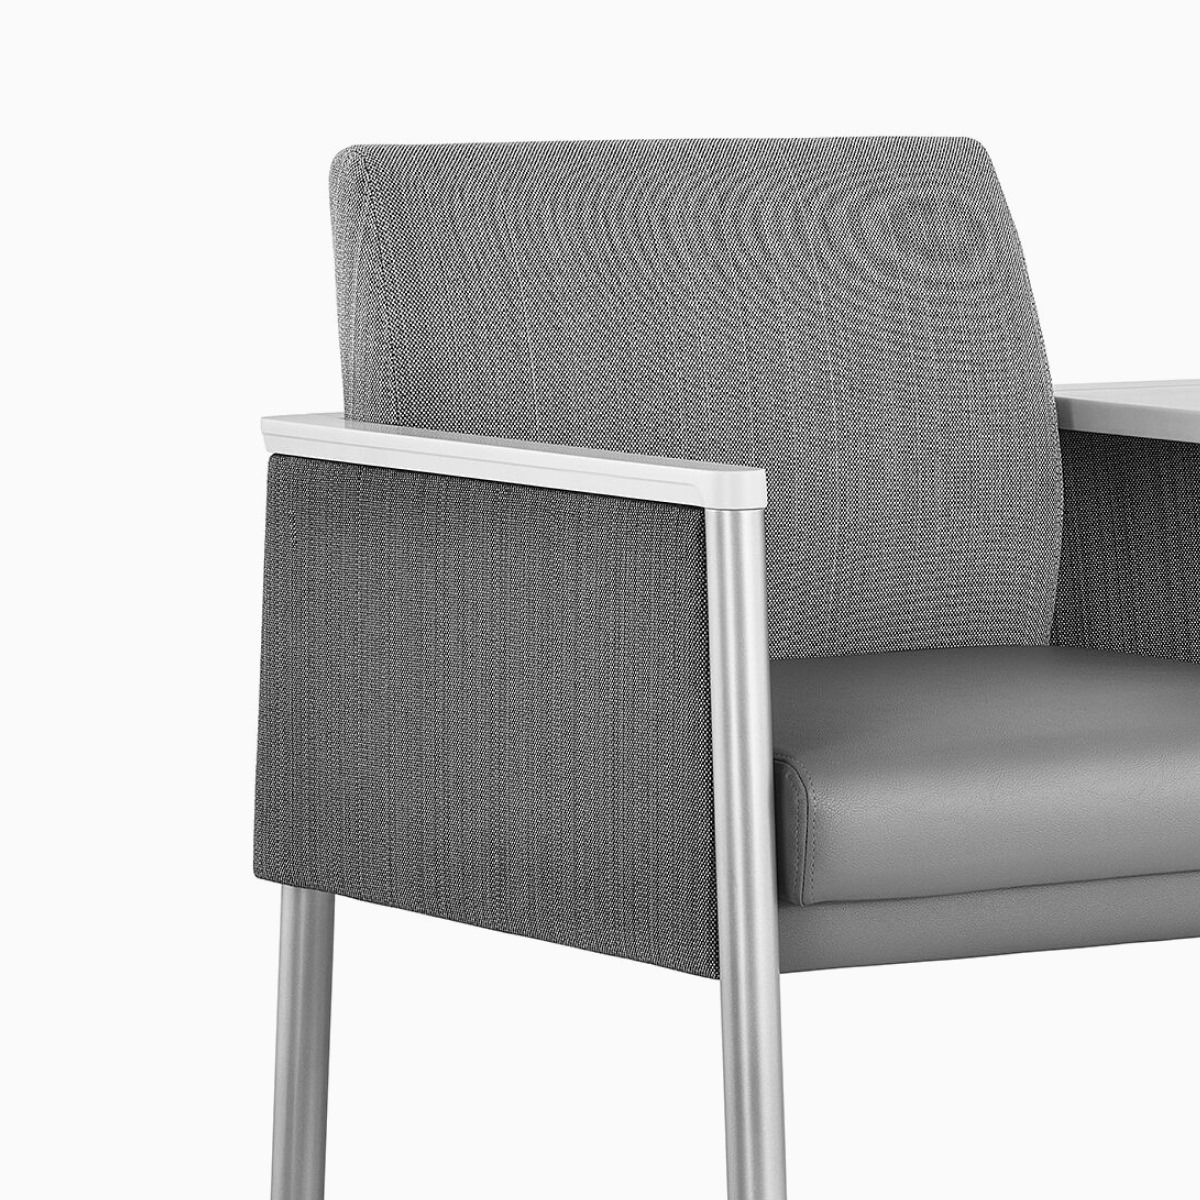 Nemschoff Palisade Easy Access Multiple Seating cropped to show the side arm and steel frame.